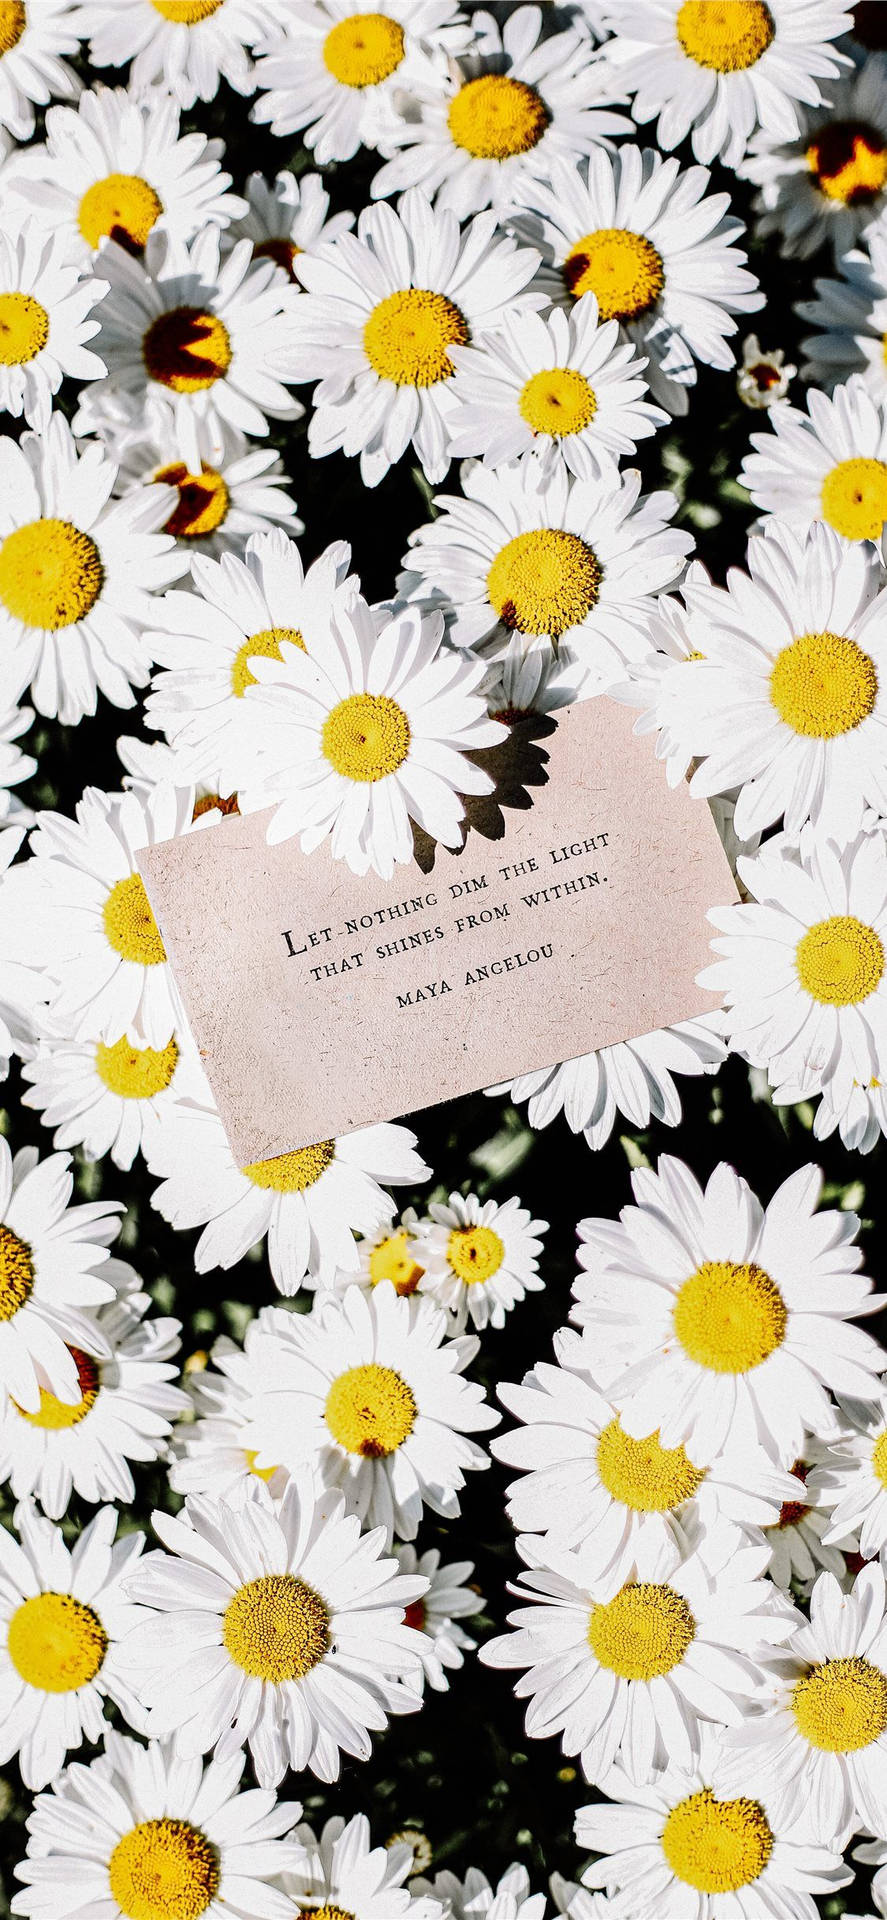 Maya Angelou Quote And Daisy Iphone Wallpaper